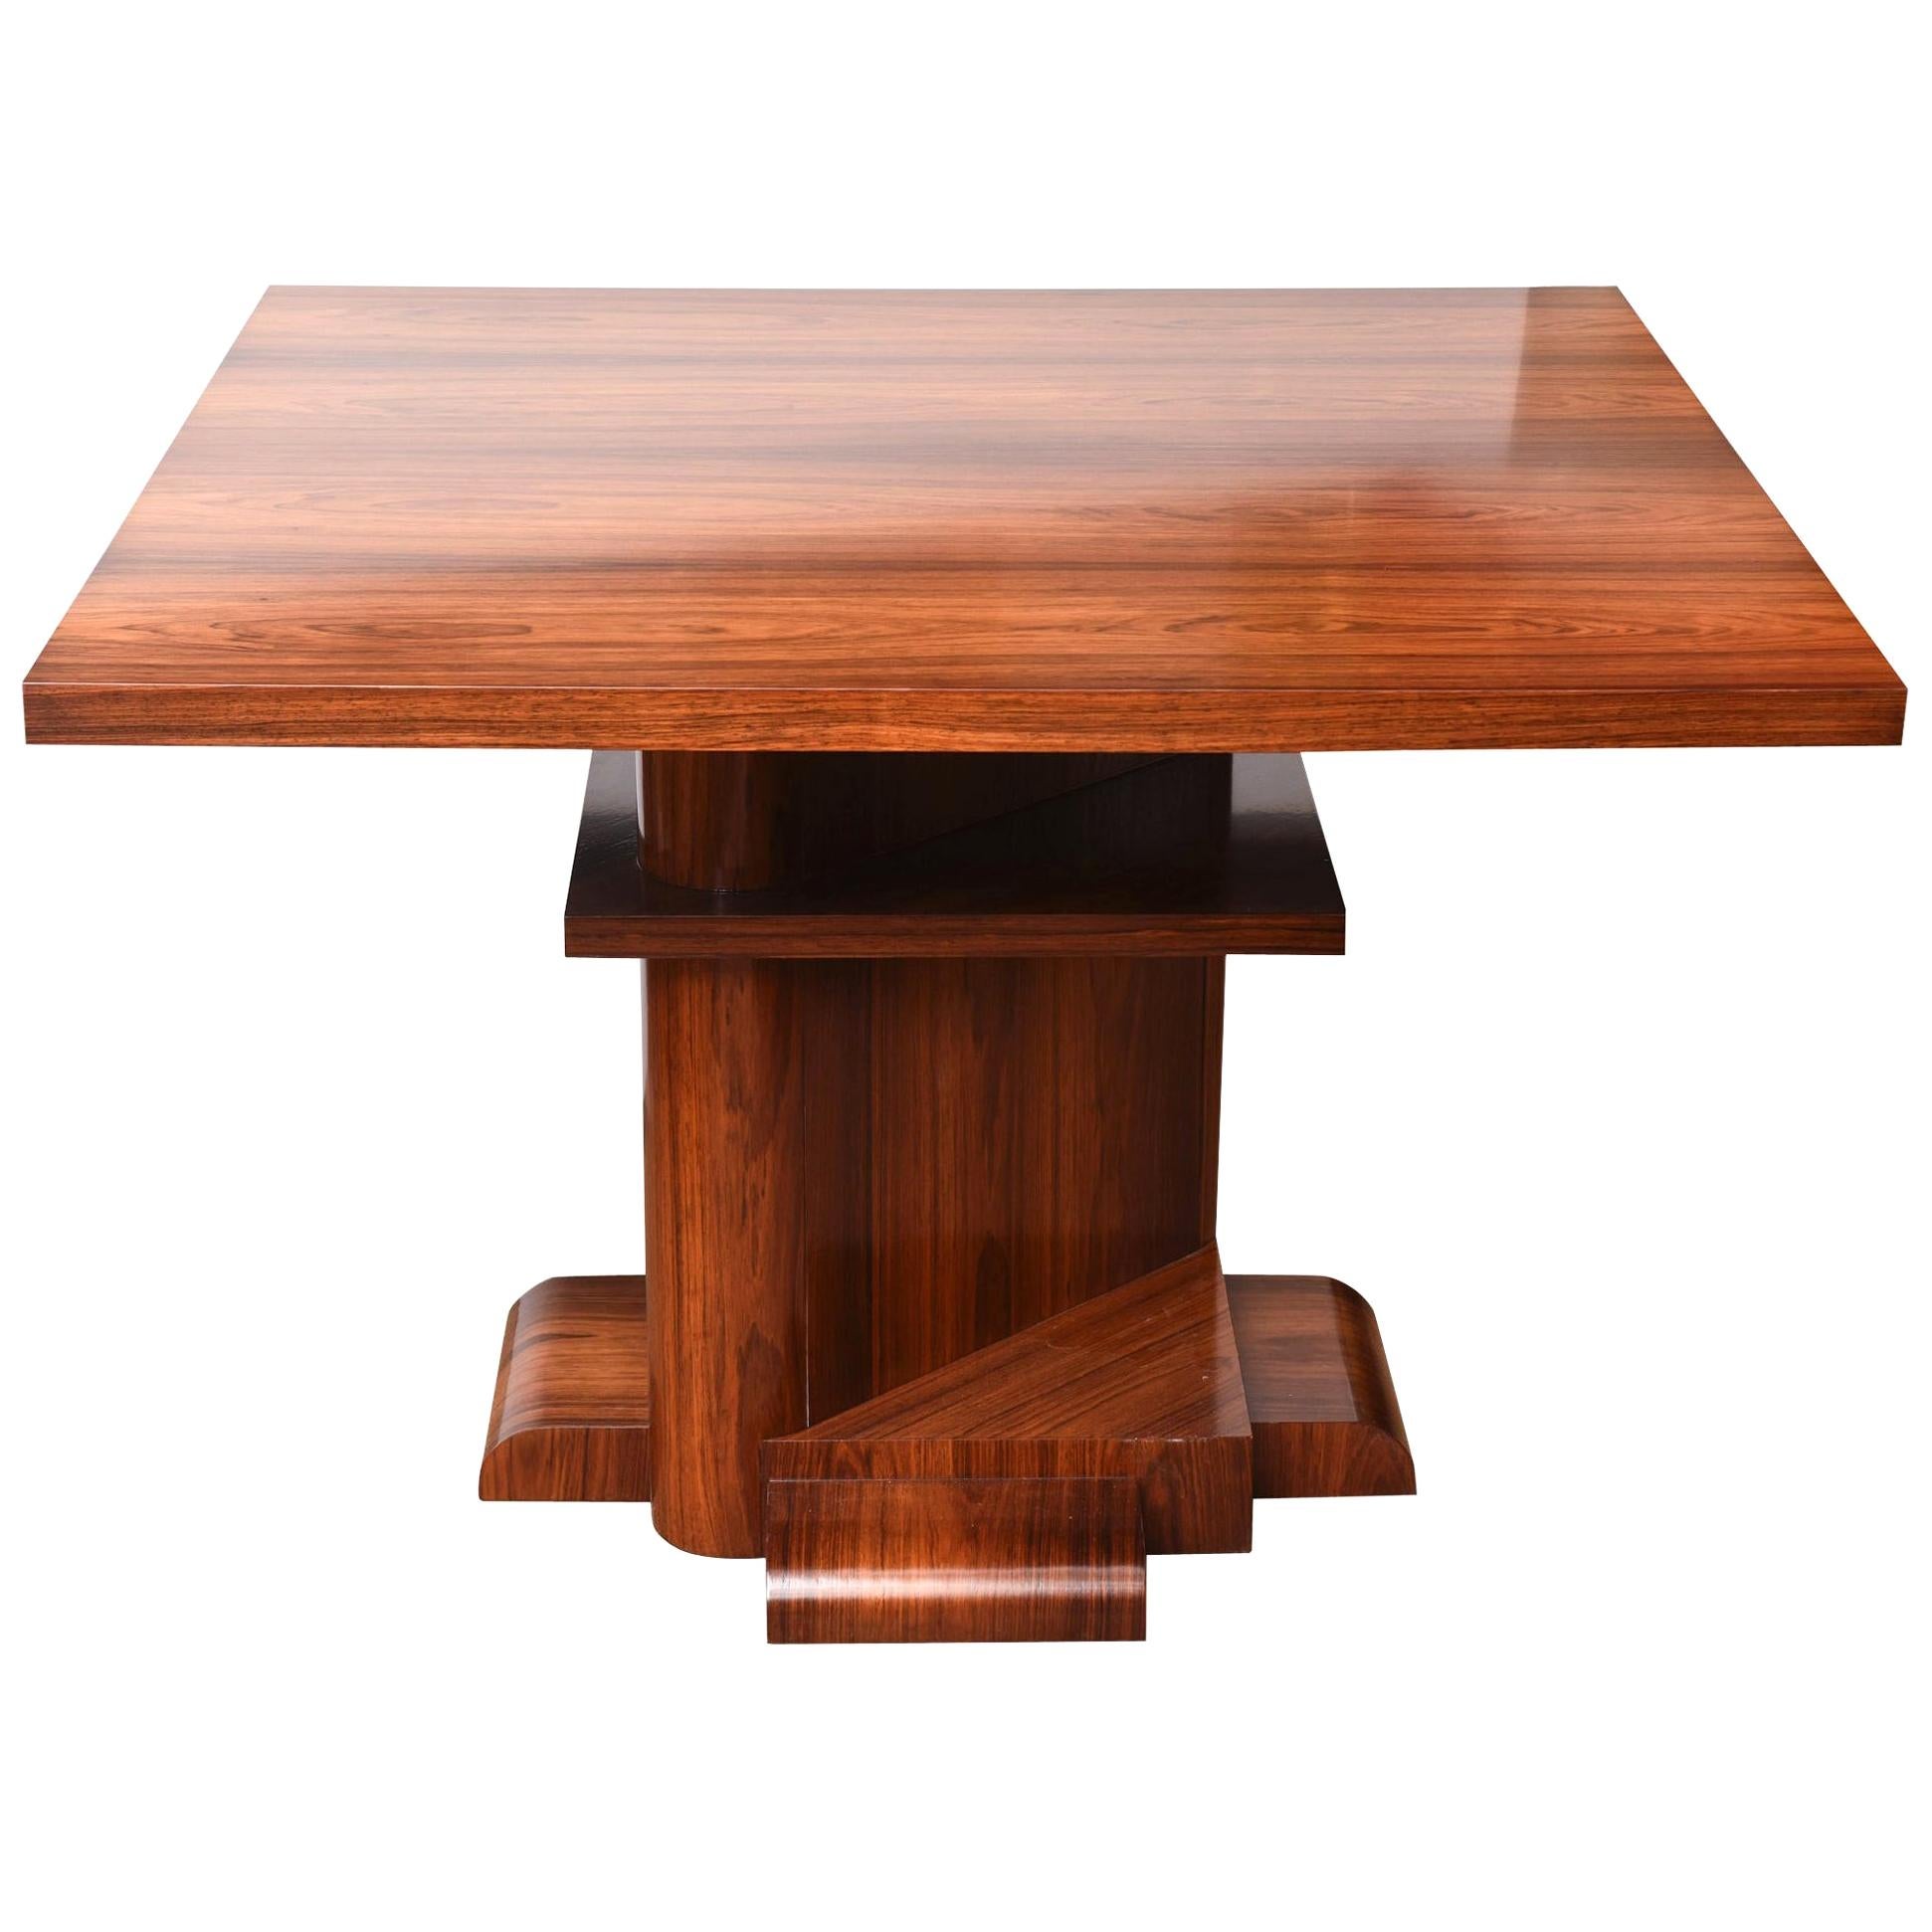 Larry Lazlo for Bexley Heath for Widdicomb Rosewood Centre Table or Dining Table